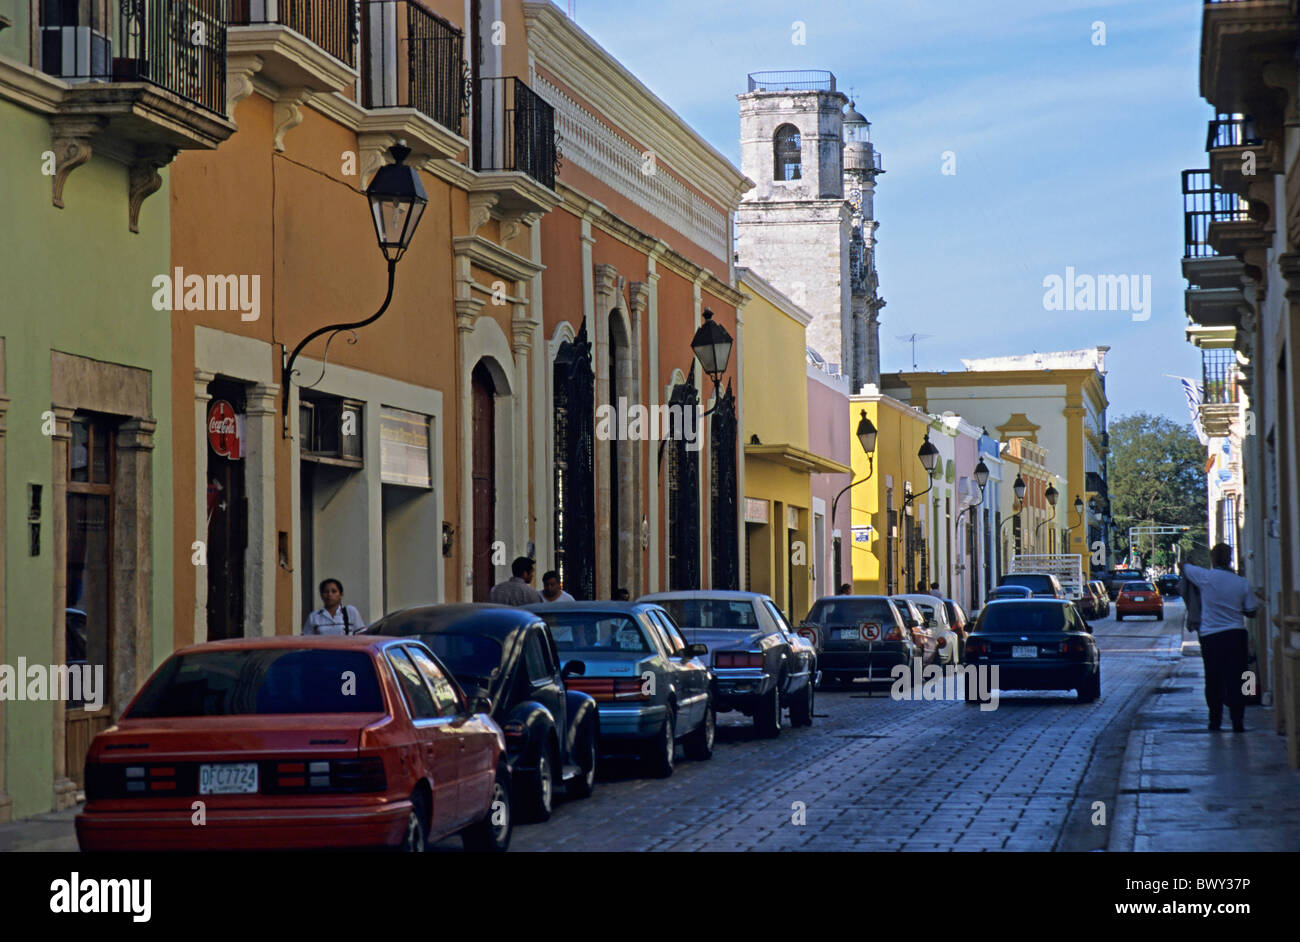 Colorful building facades and parked cars in a street, Campeche town, Mexico. Stock Photo